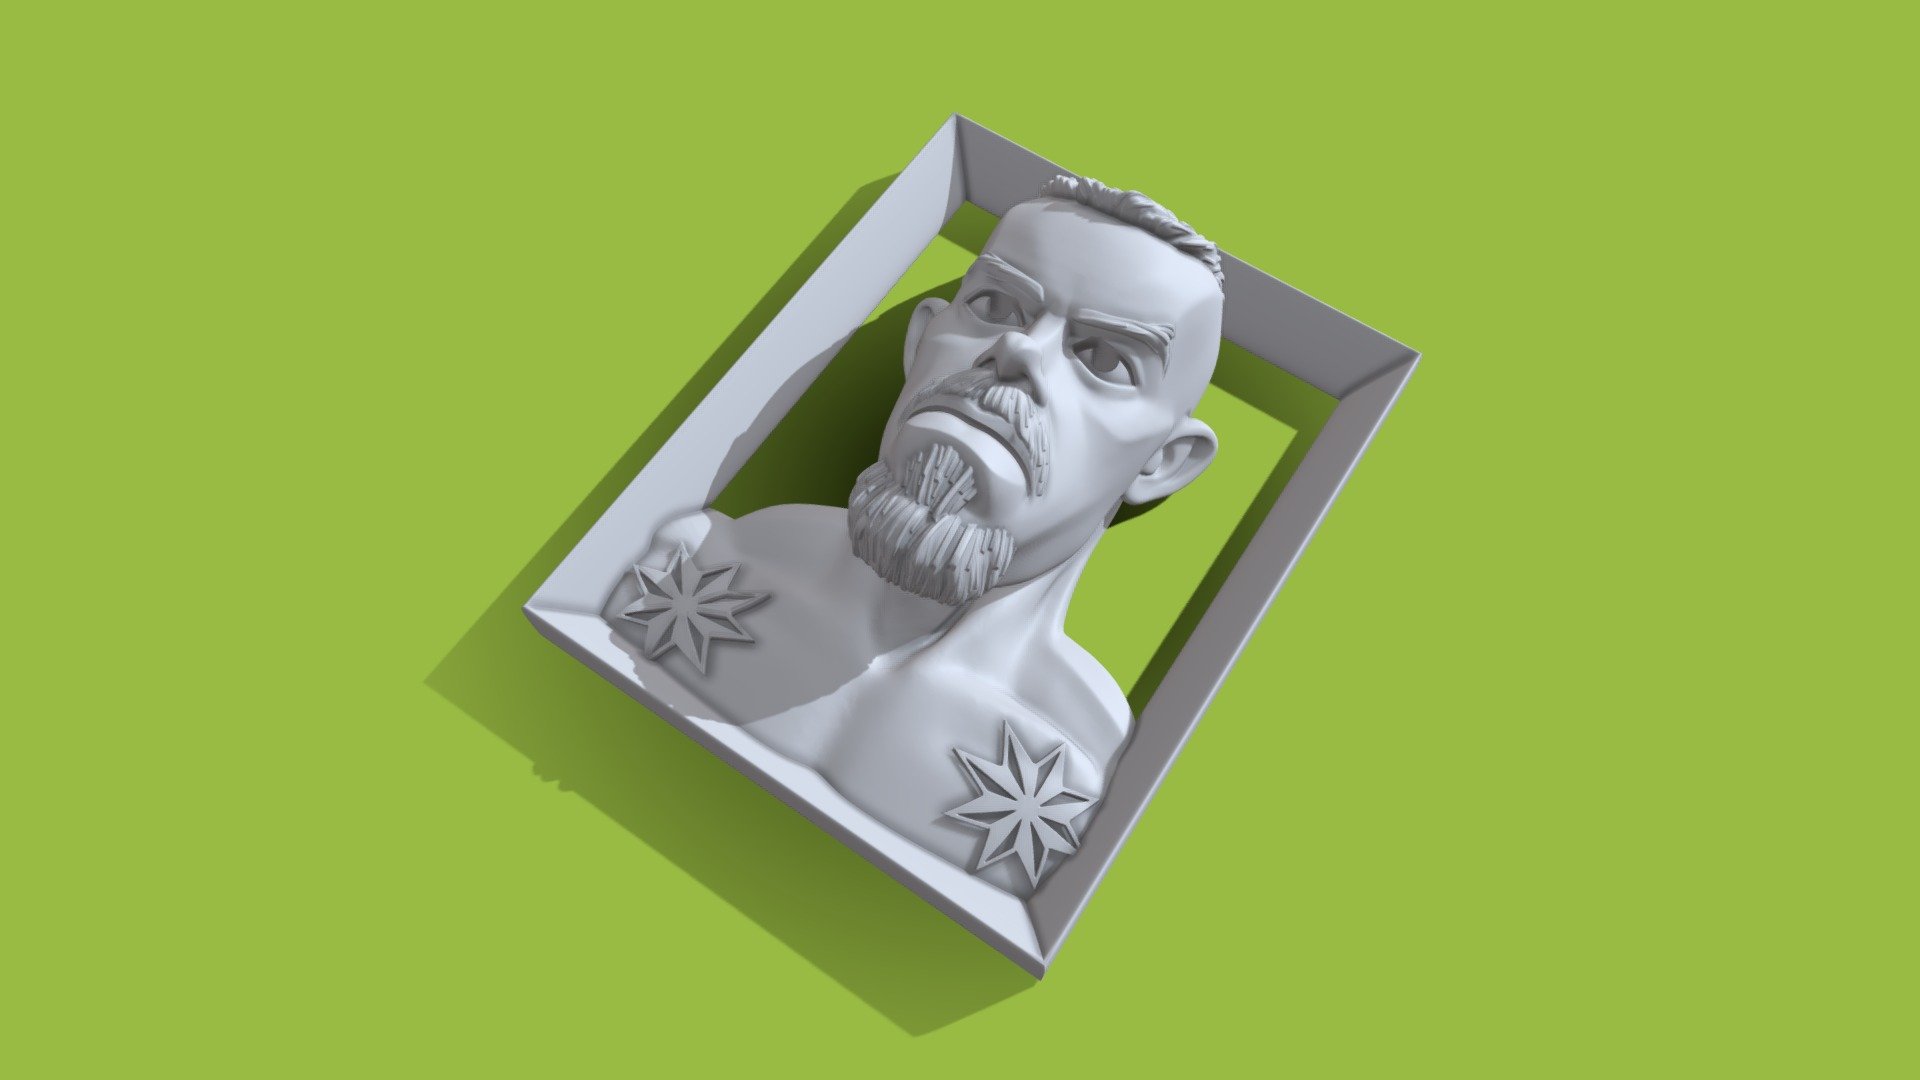 Free STL of Yuri Boyka from Undisputed film series, played by an amazing Scott Adkins. Designed for FDM printing, as wall-mounted portrait 3d model